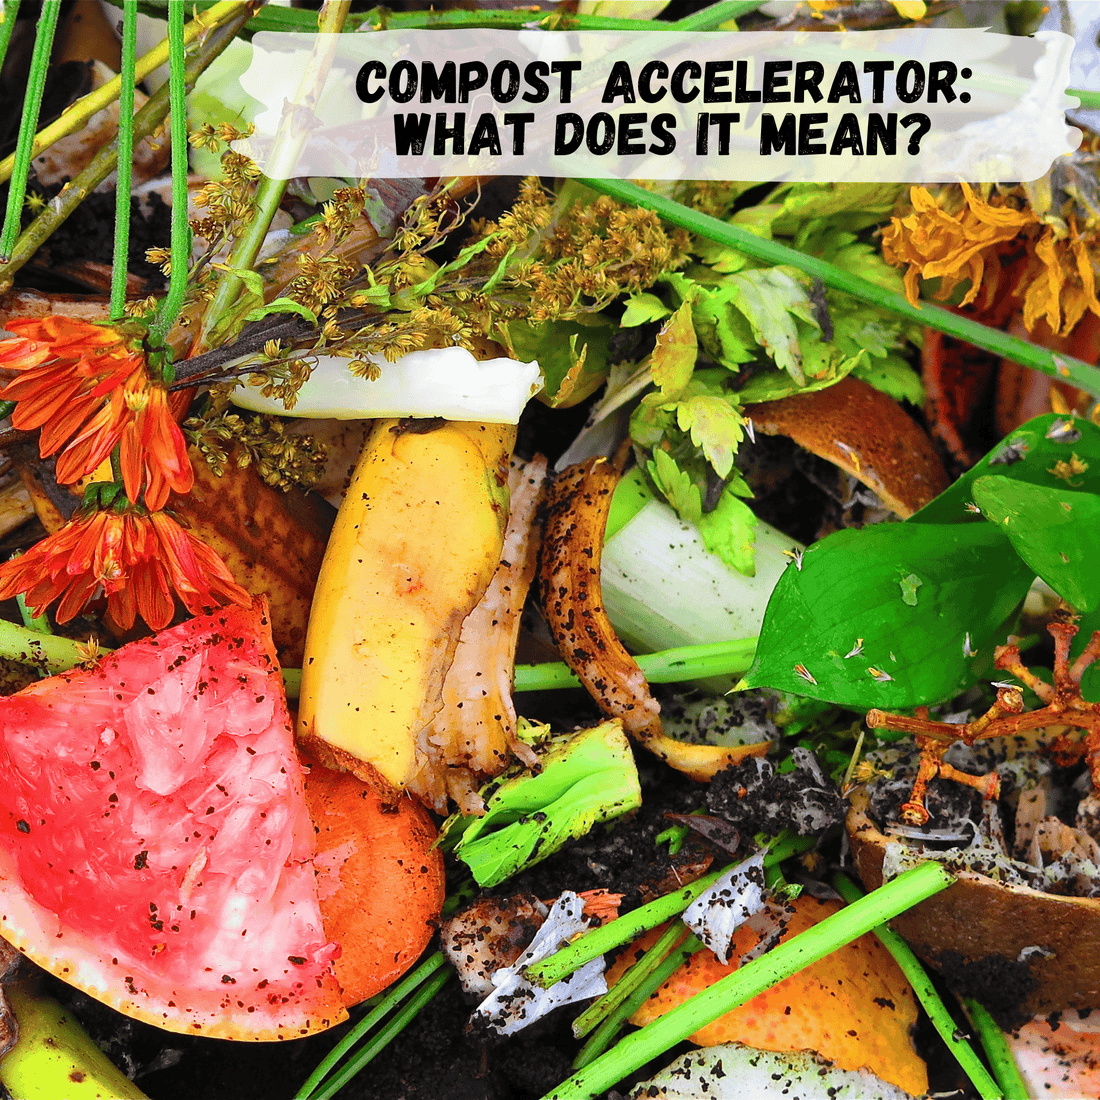 brightly colored compost that includes fruits, flowers and vegetables